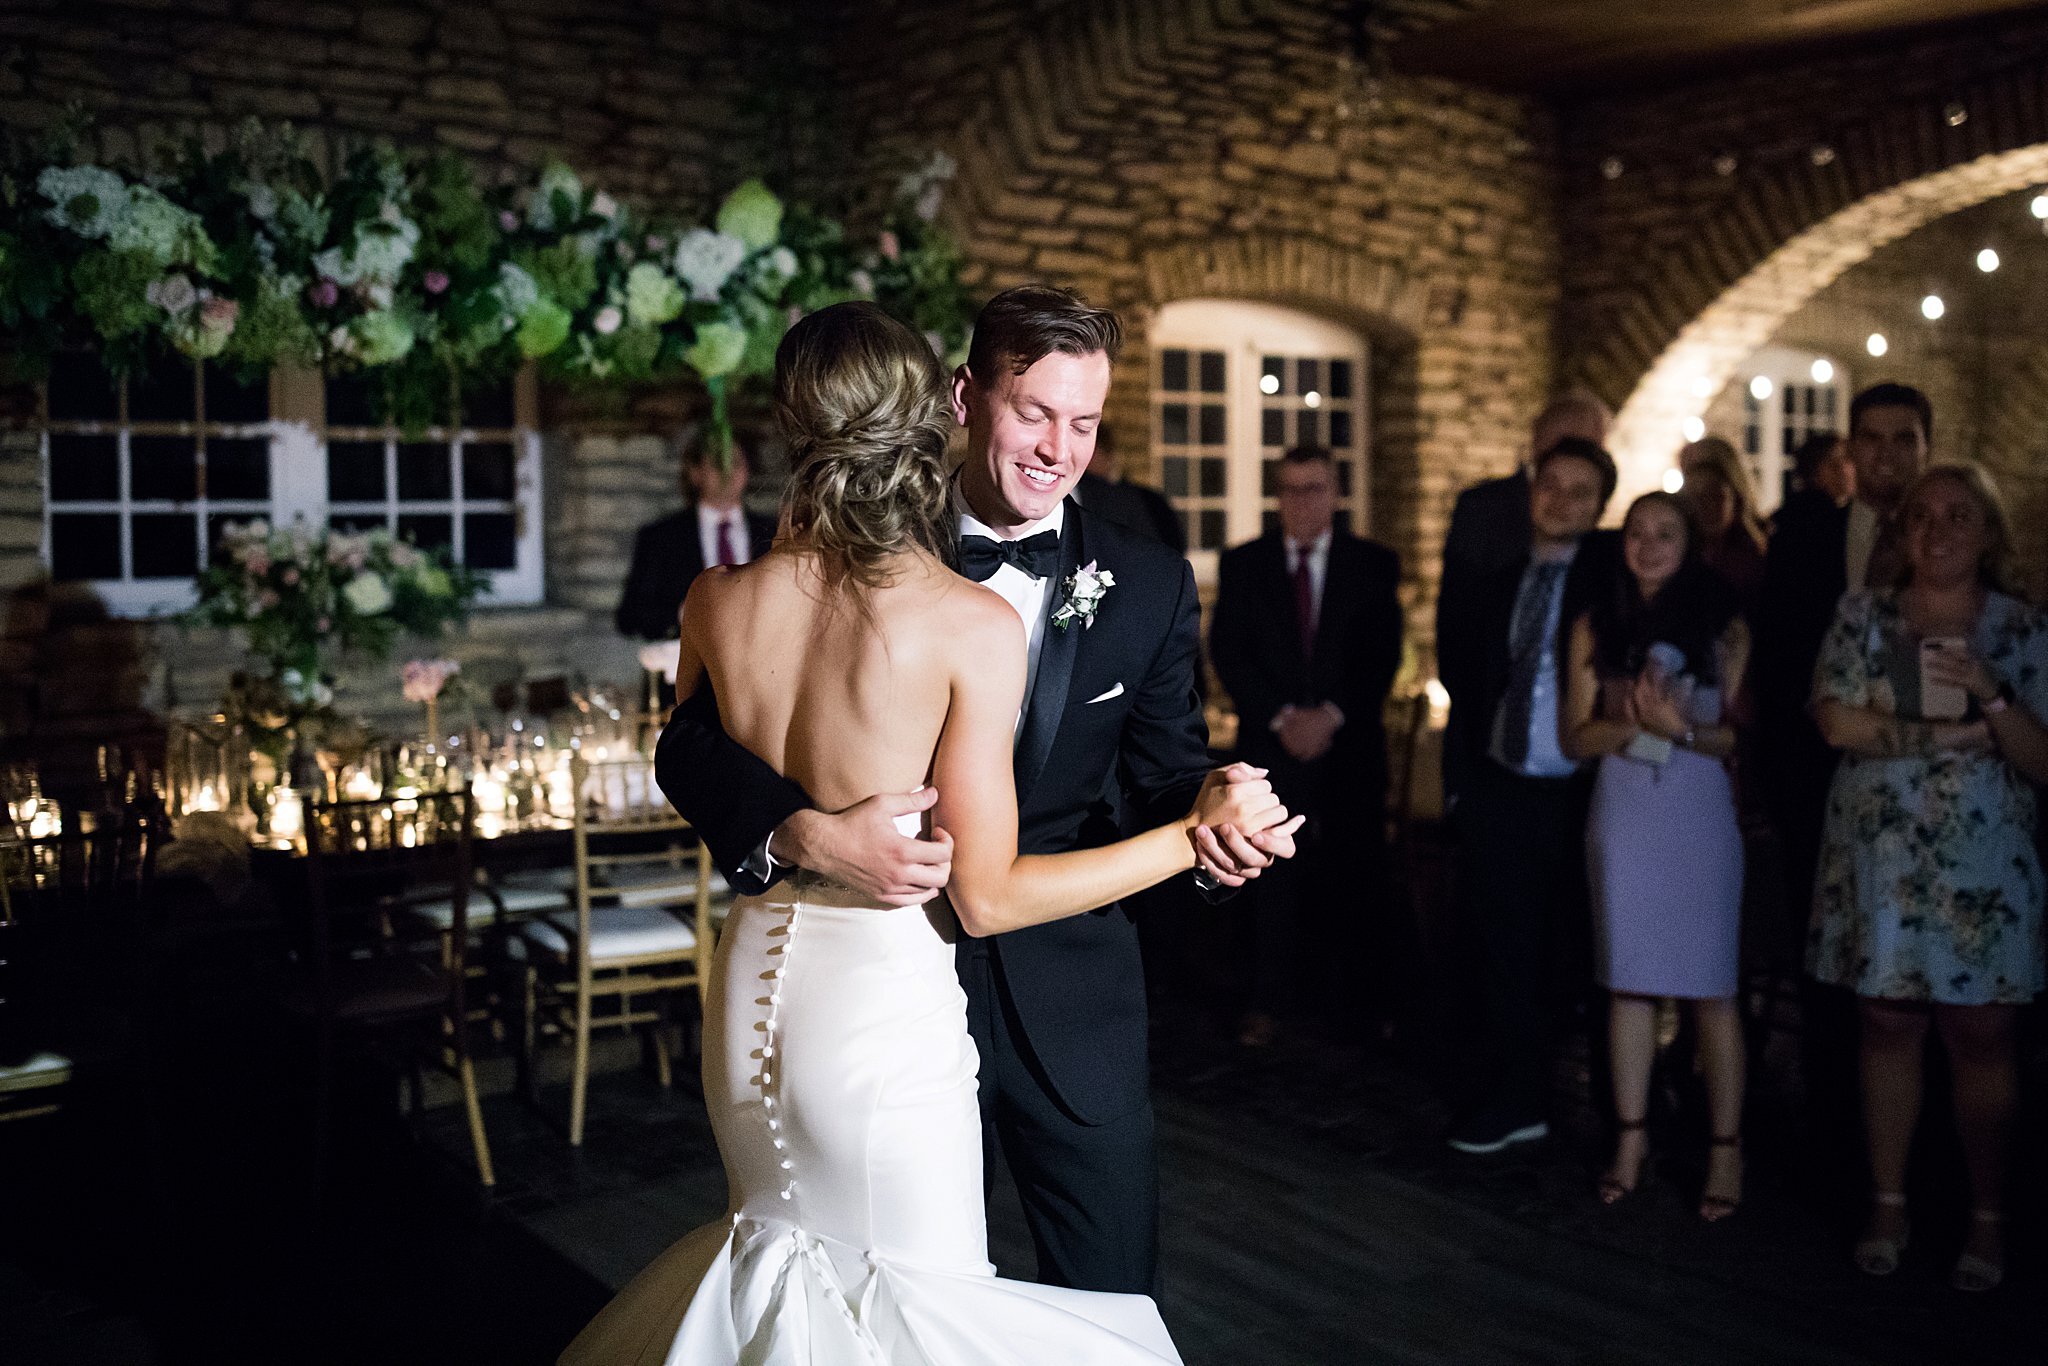  Bride and groom first dance at Mayowood Stone Barn 1 of 2. 